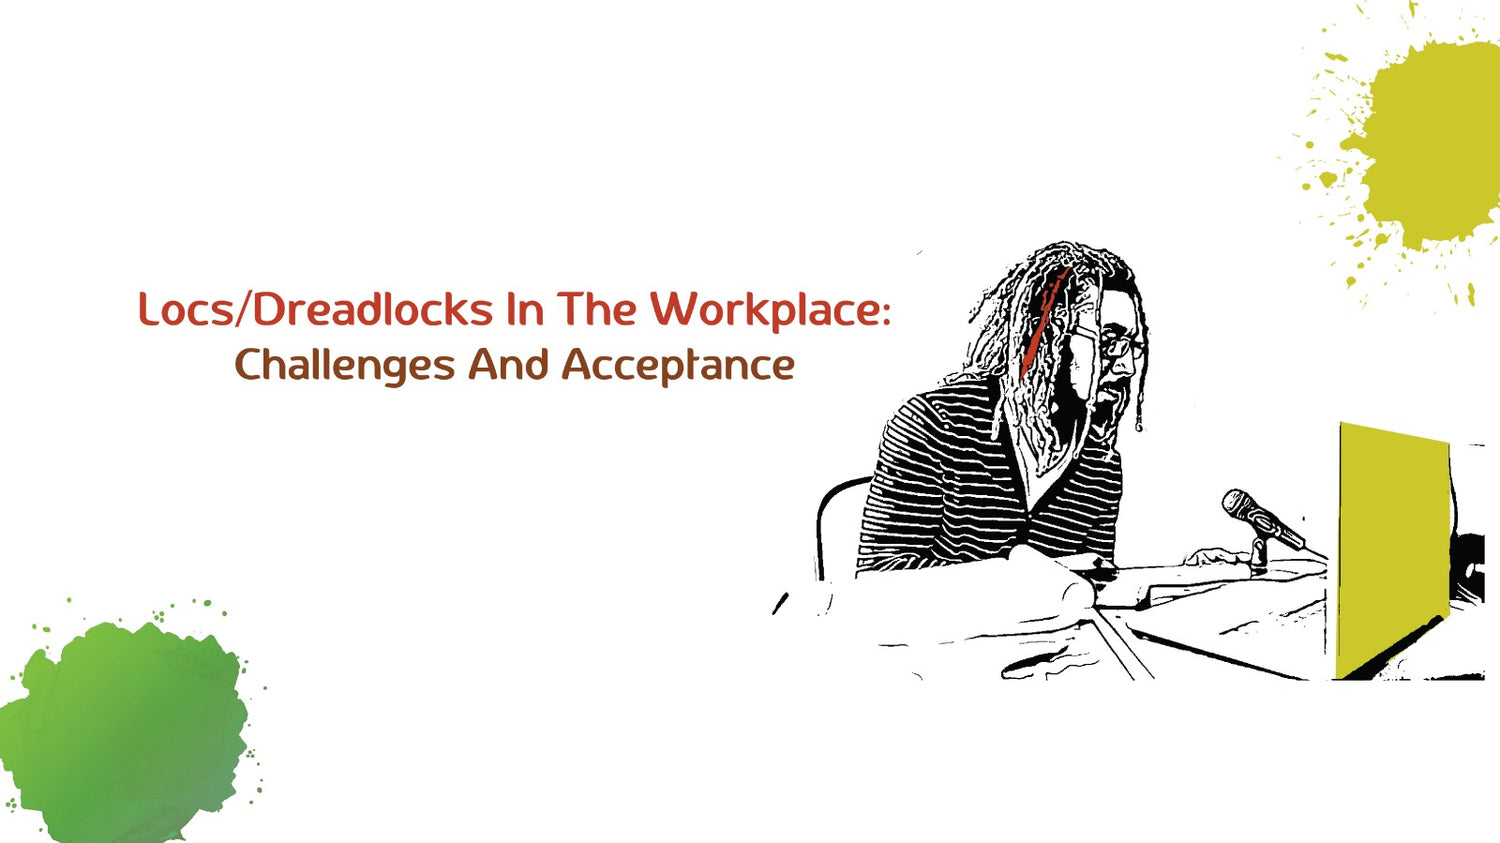 Locs/Dreadlocks in the workplace: Challenges and acceptance